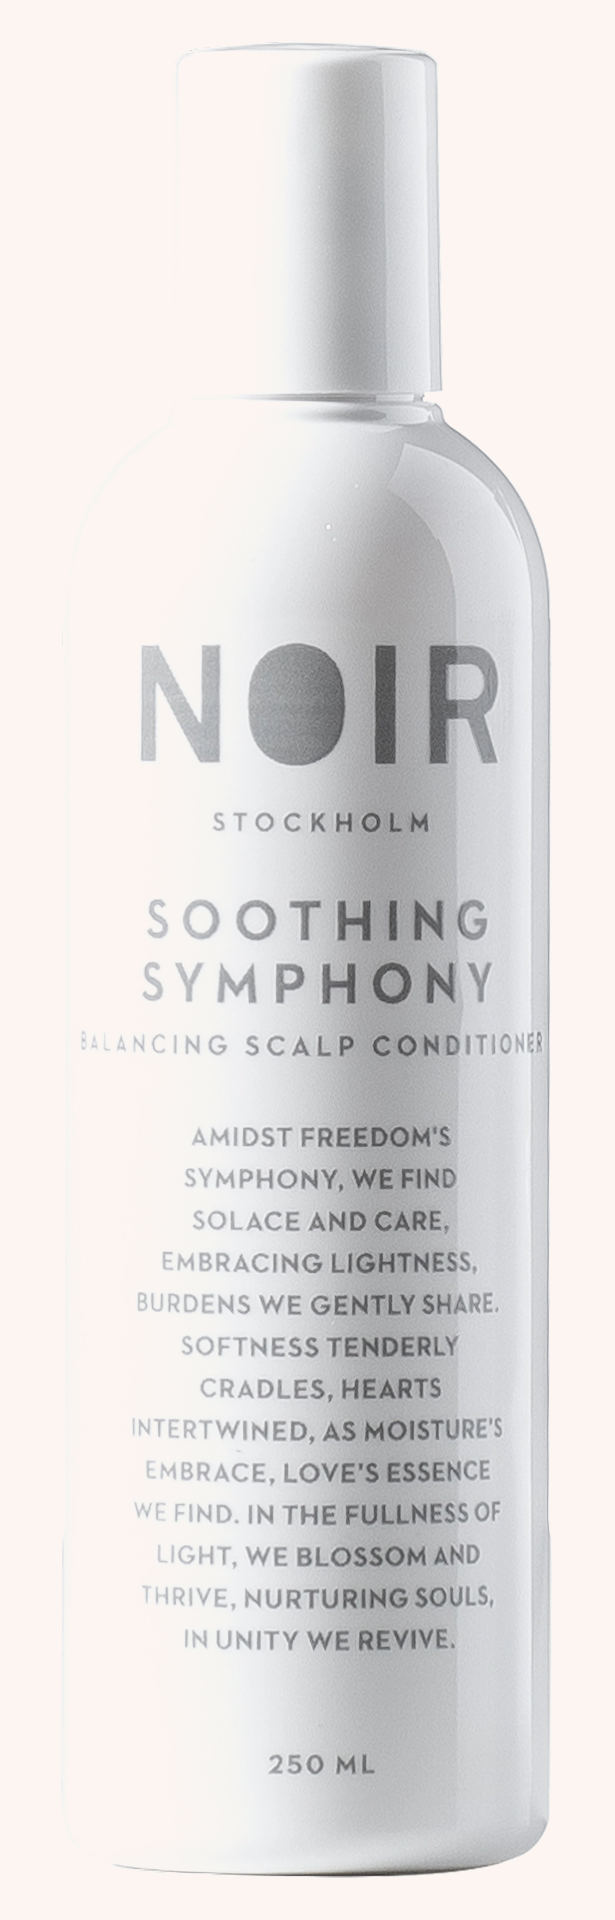 Soothing Symphony Balancing Scalp Conditioner 250 ml